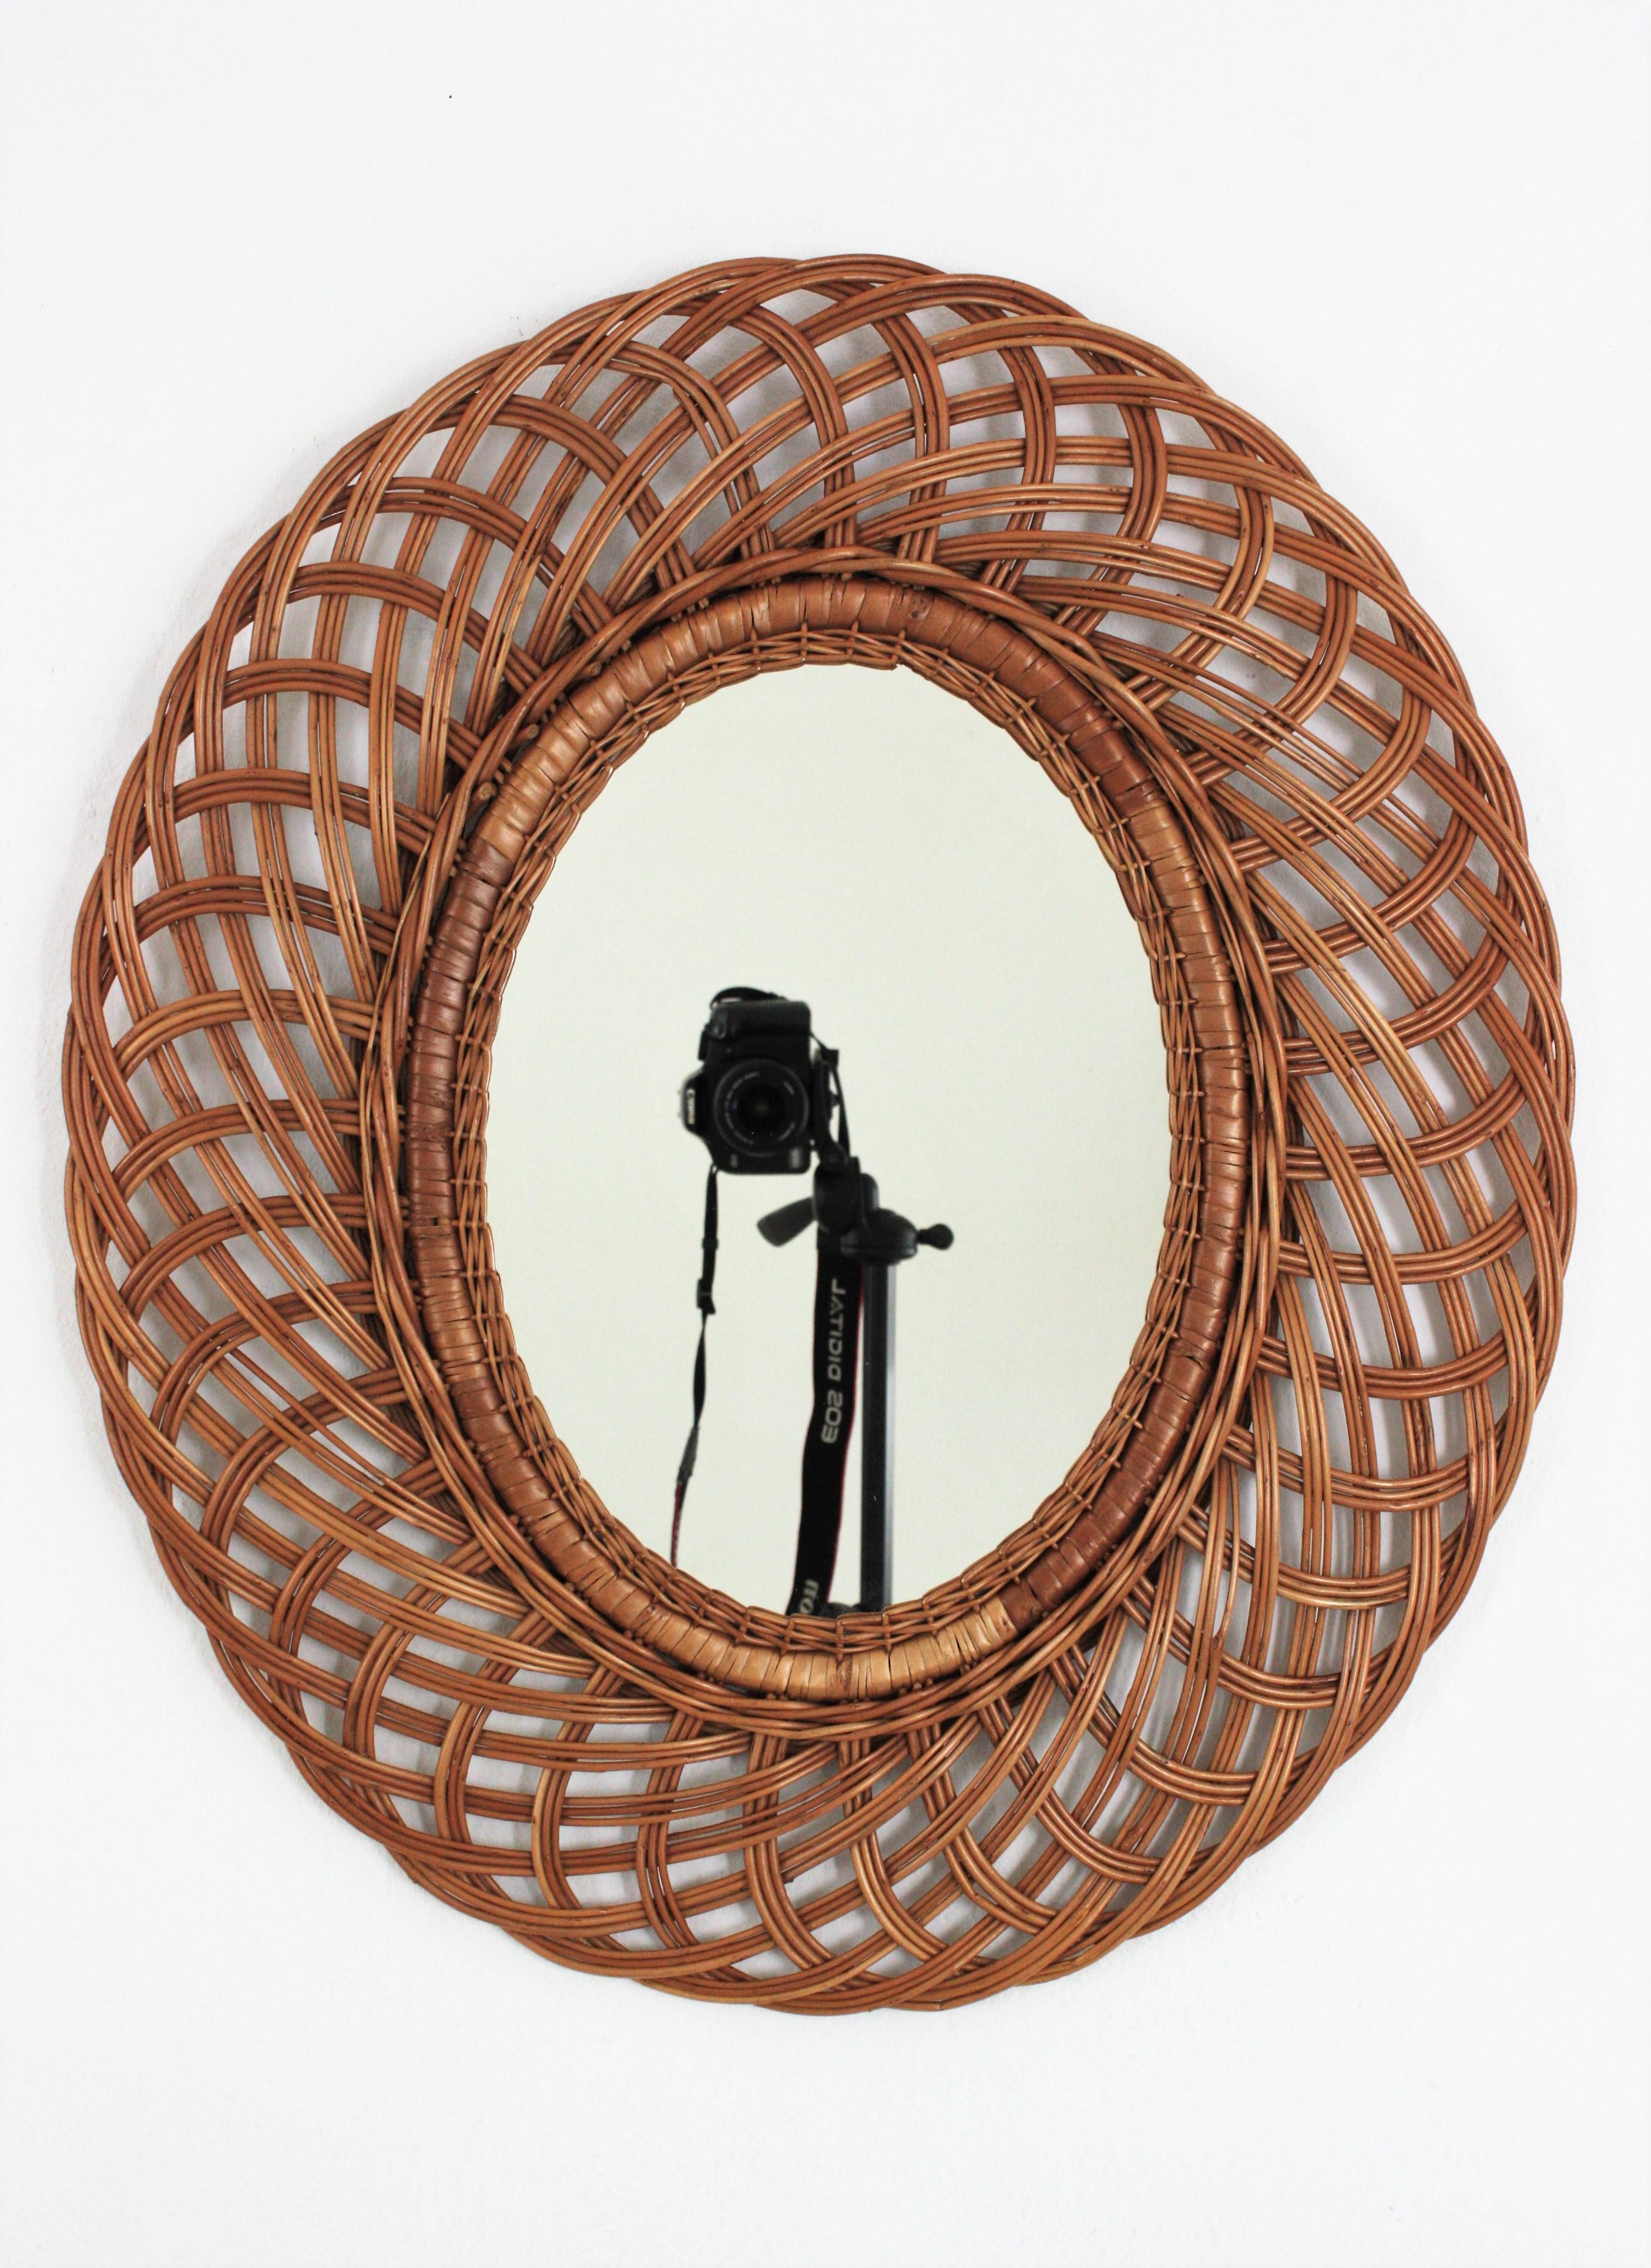 20th Century Pair of Rattan and Wicker Oval Mirrors, Spain, 1960s